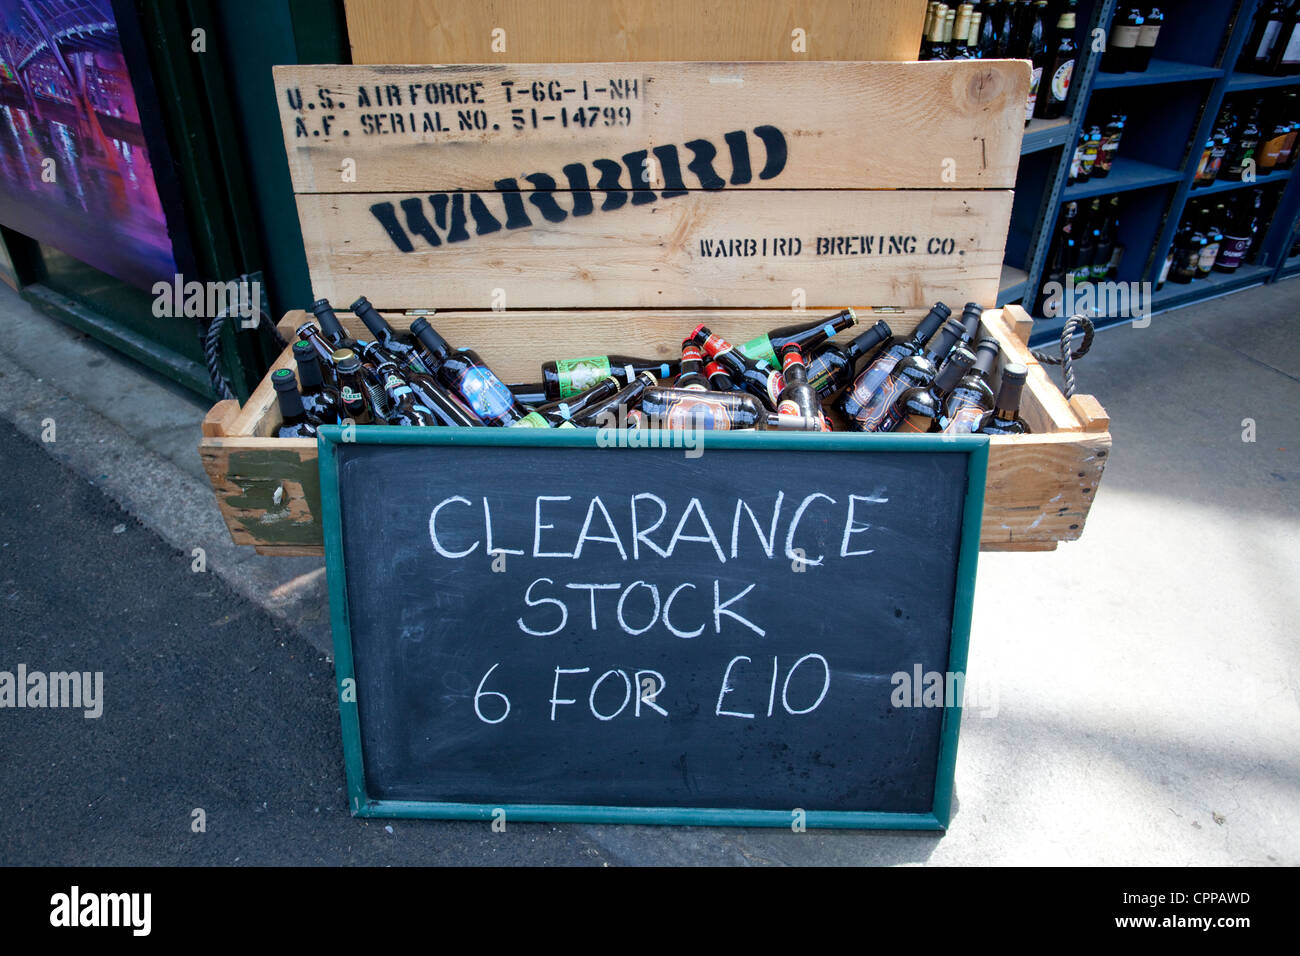 clearance stock sign on a Warbird box full of bottles of beer, Borough Market, London, England, UK Stock Photo